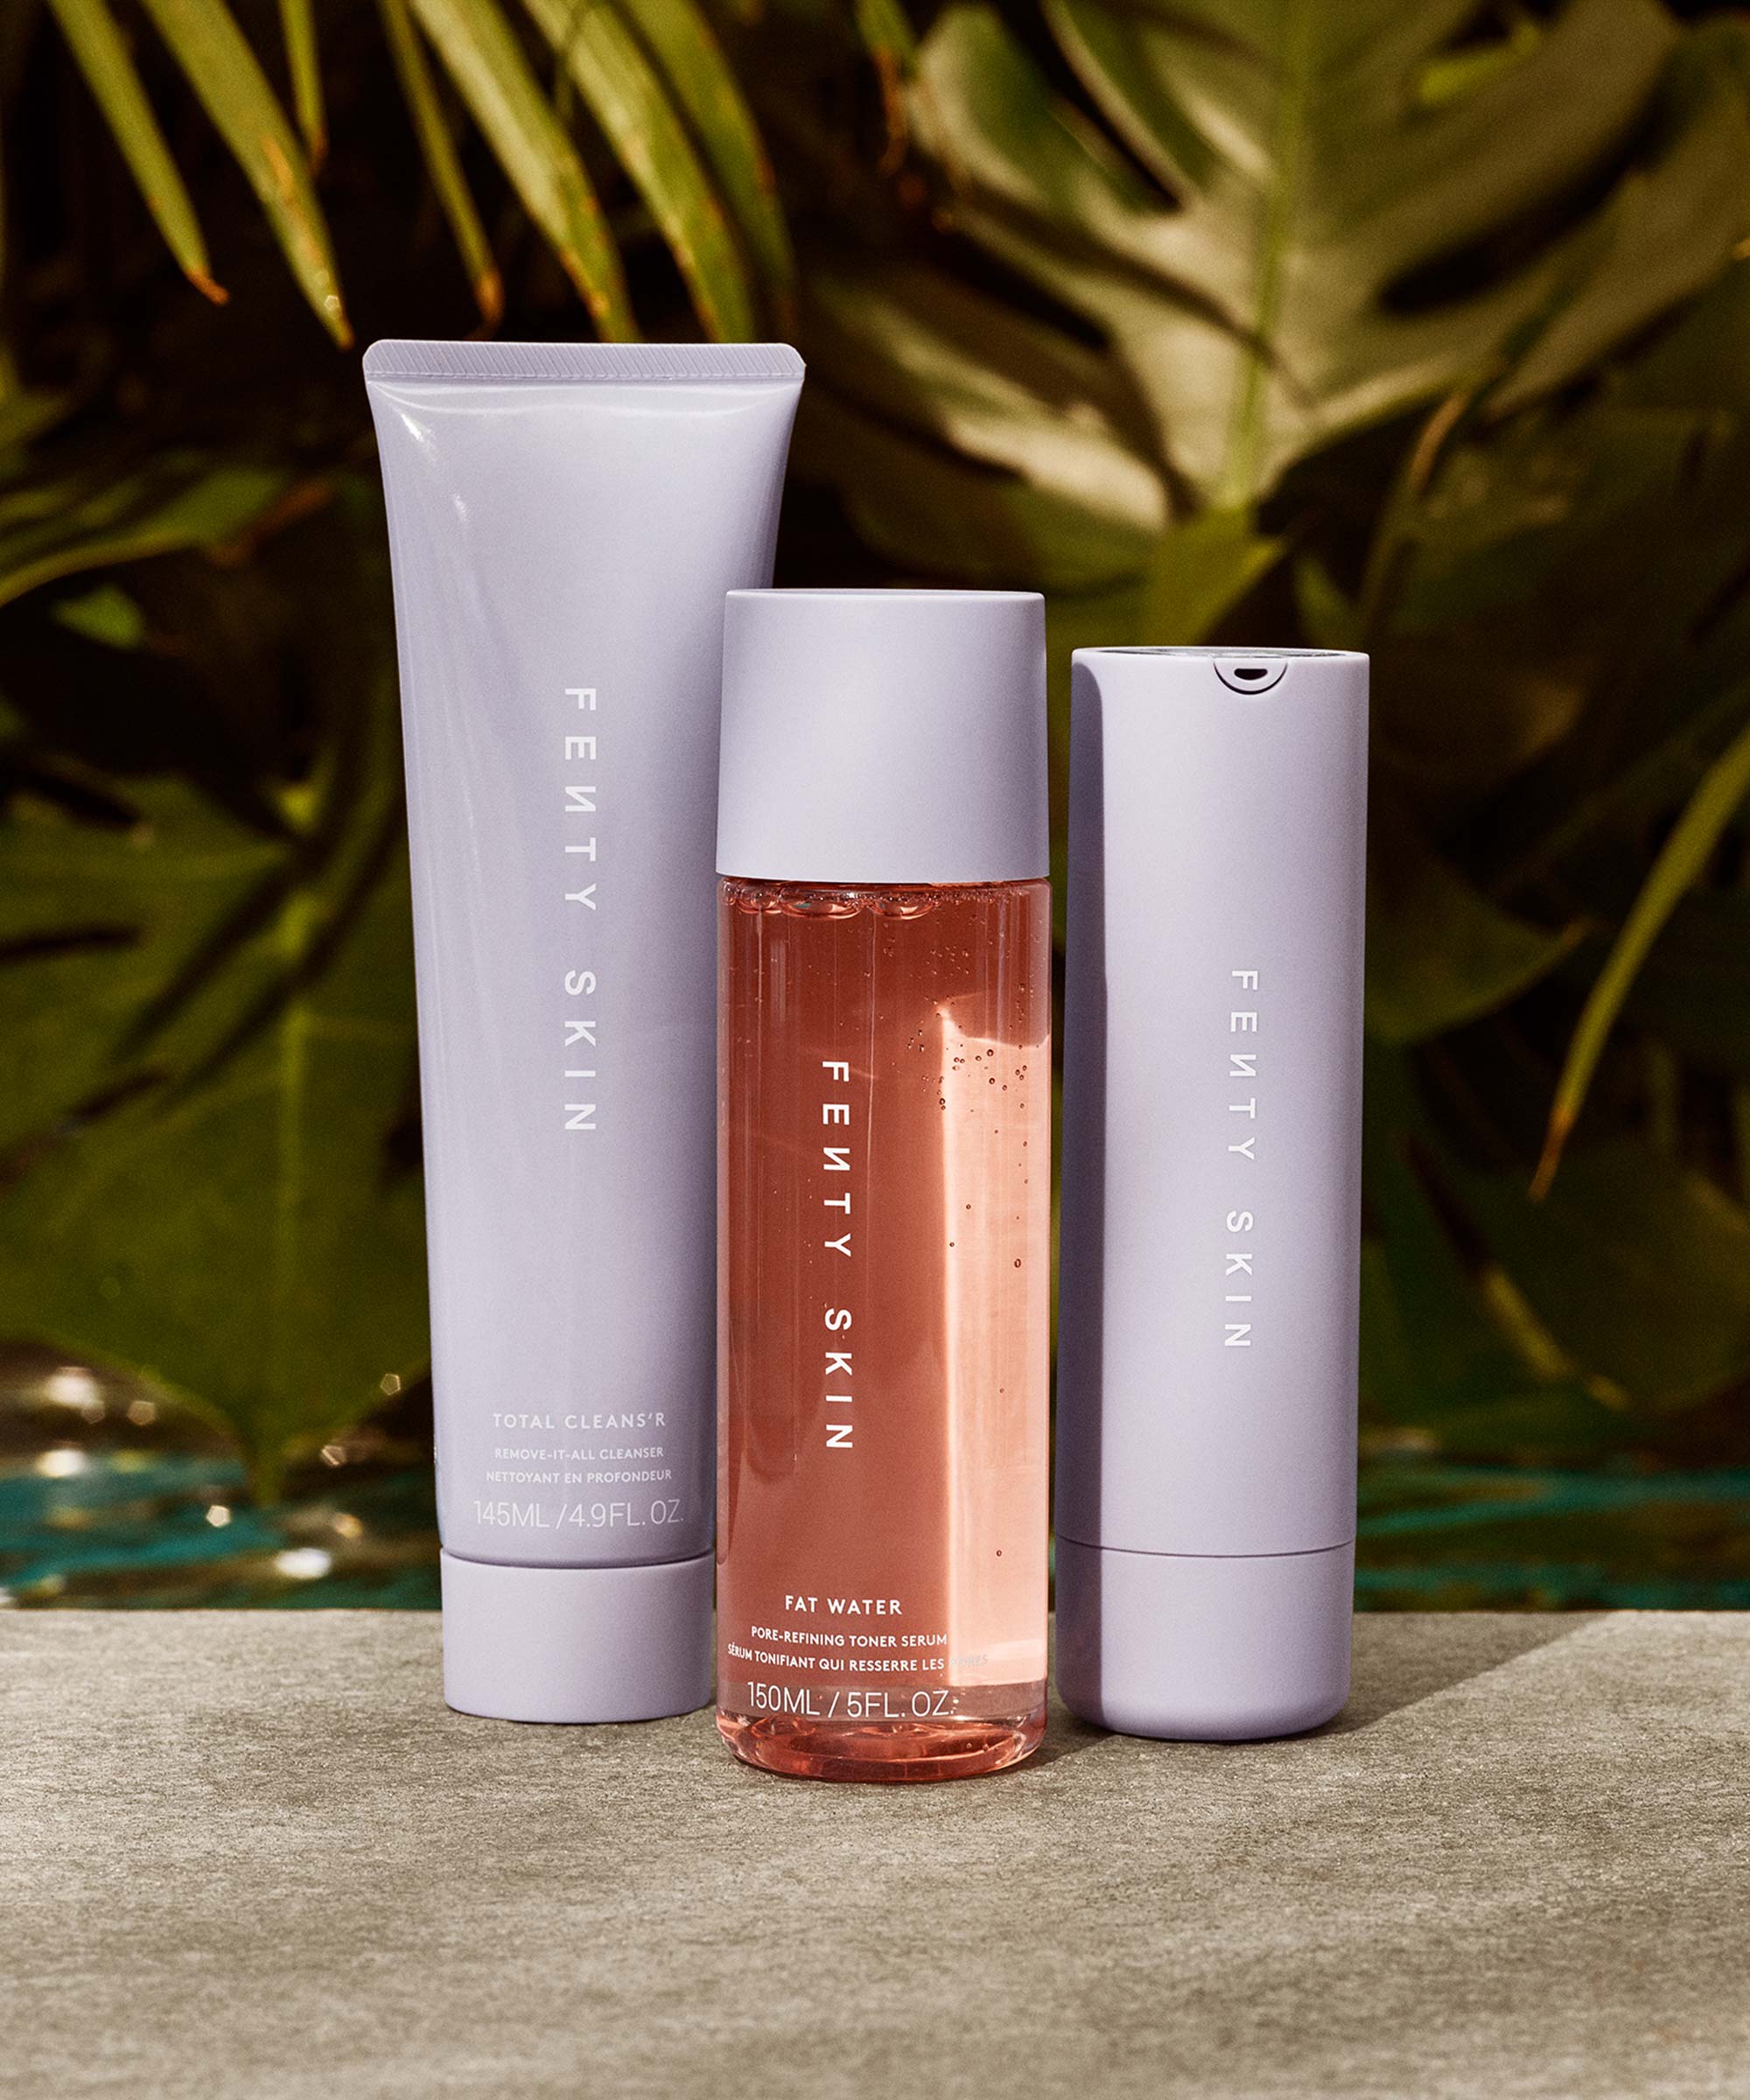 Rihanna Fenty Skin Products: Fenty Skin Products Review